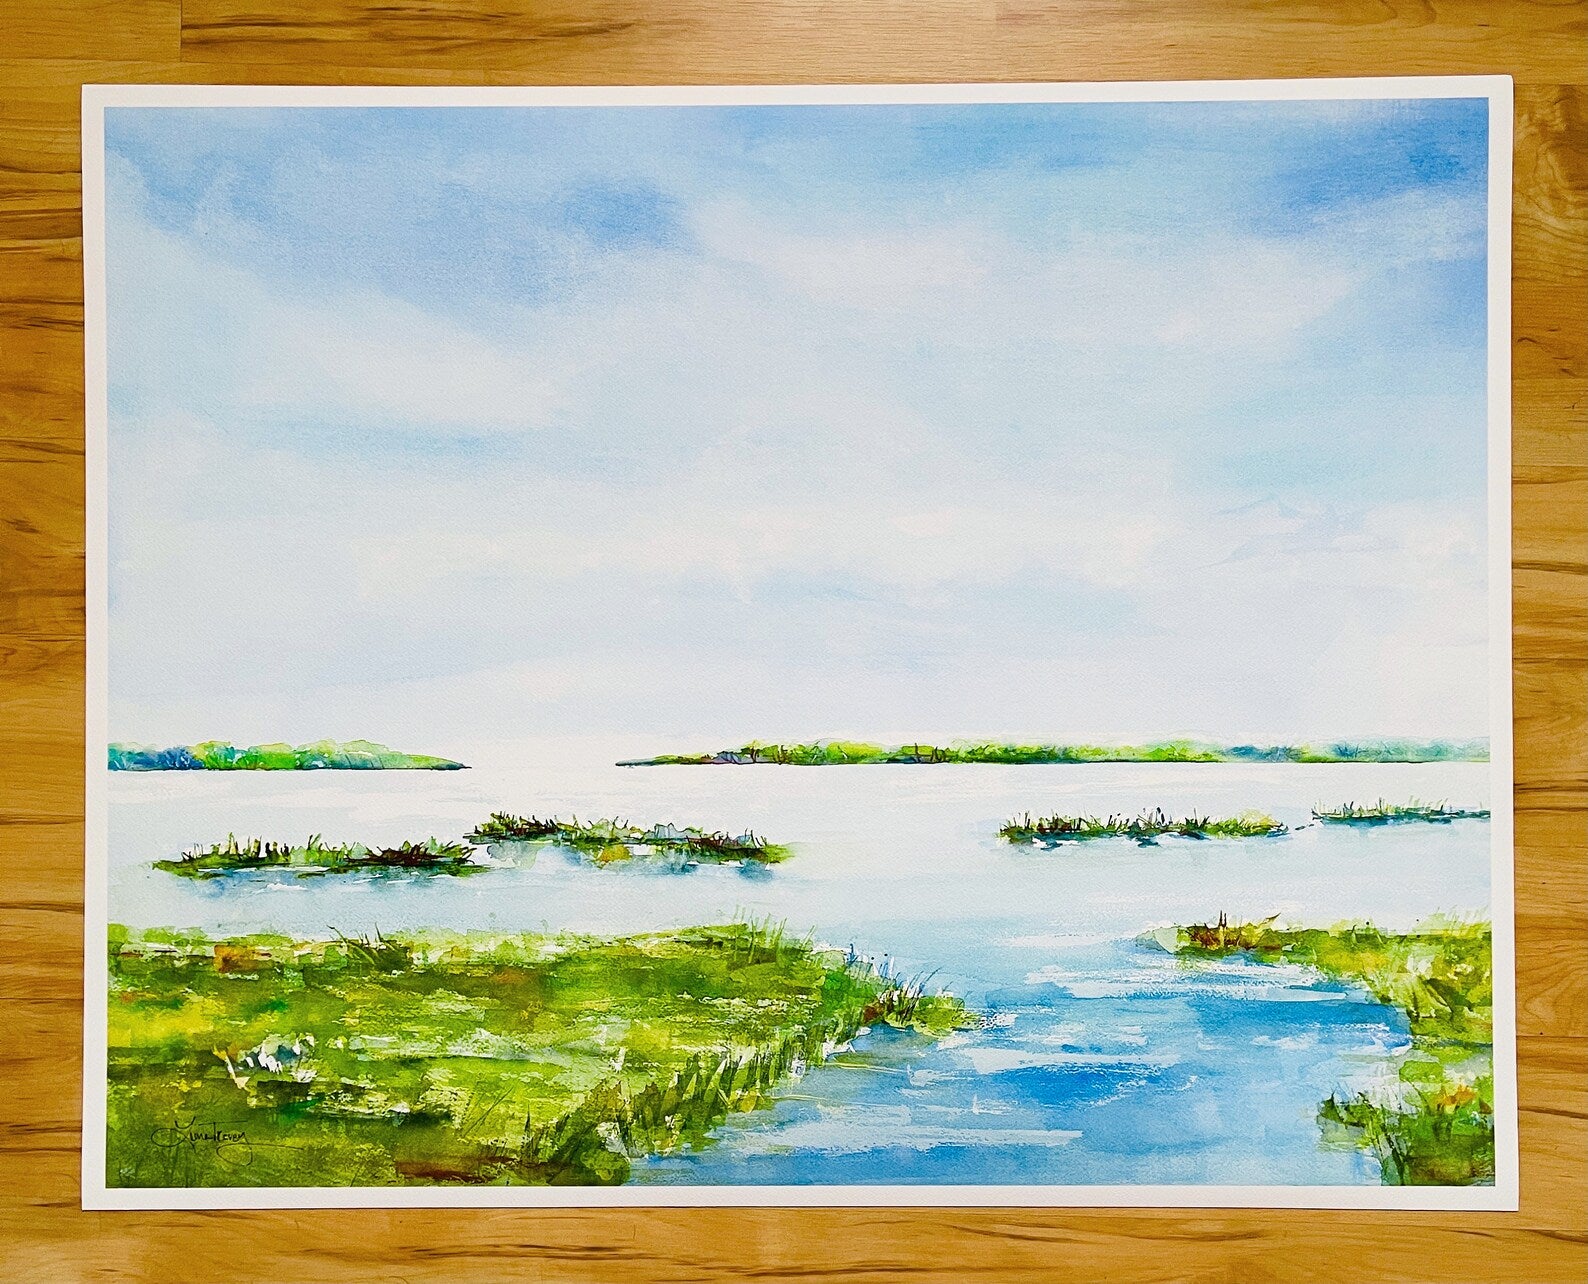 Low Country Giclee Print